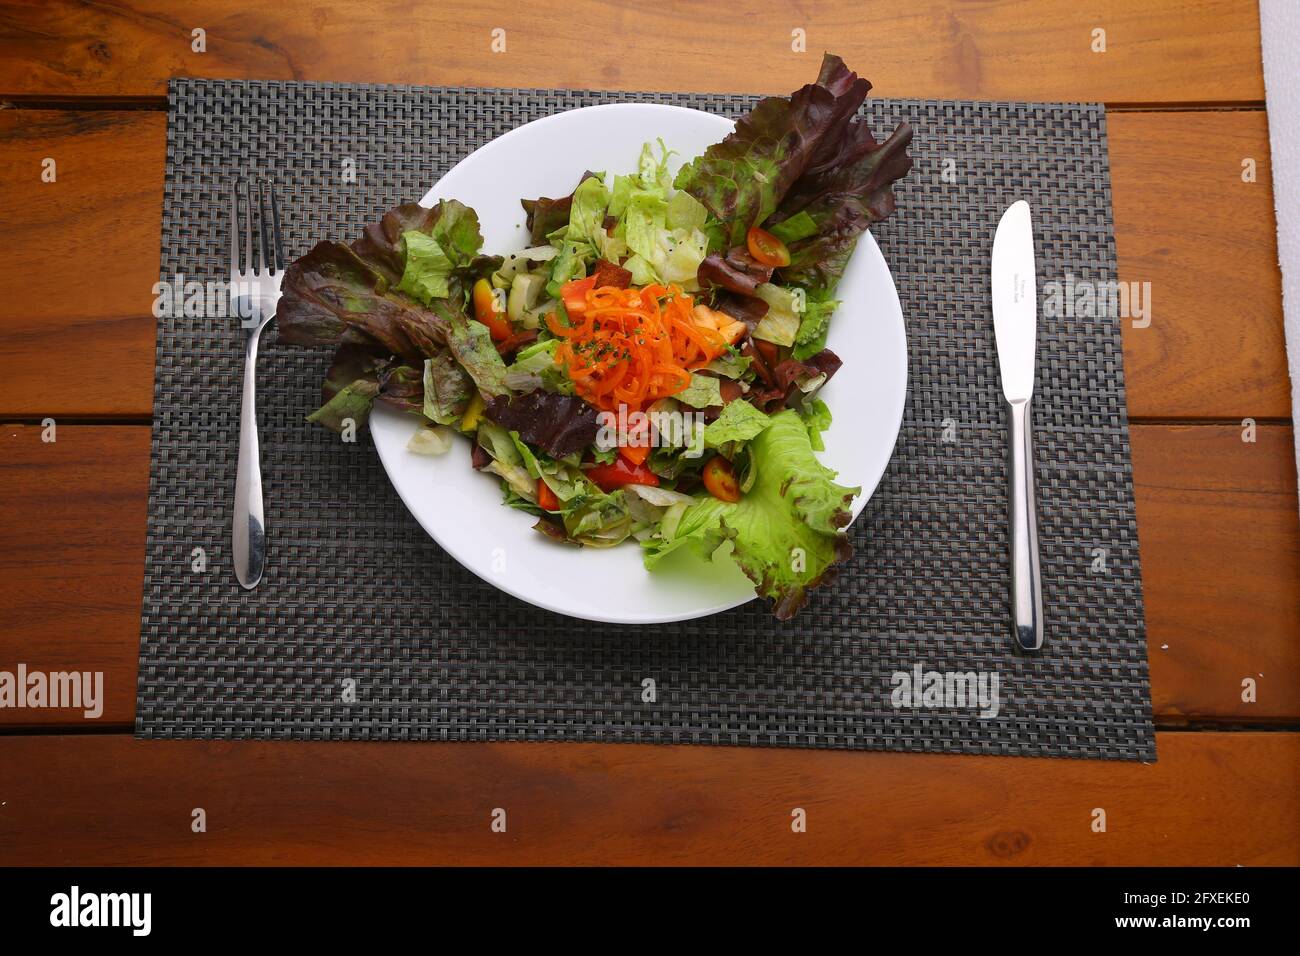 Dark Leafy Green Veg Salad,healthy leafy salad  arranged in a white plate  with grey table mat and serving knife and fork with wooden background or te Stock Photo